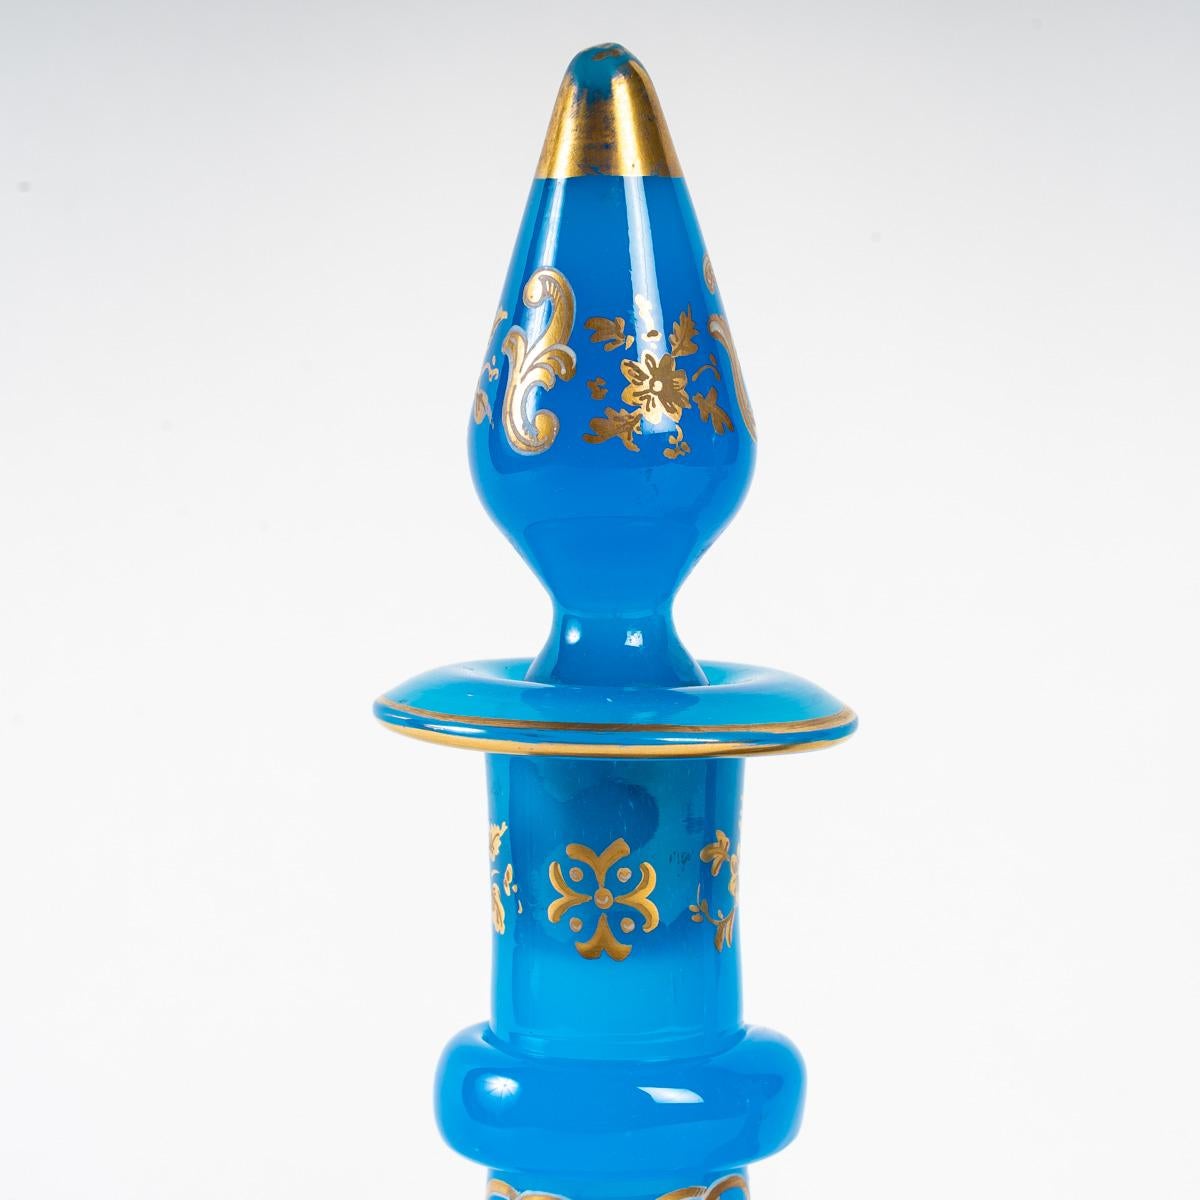 Blue enamelled opaline goblet and lid, 19th century, Napoleon III period.
H: 27 cm, d: 12 cm
ref 3104